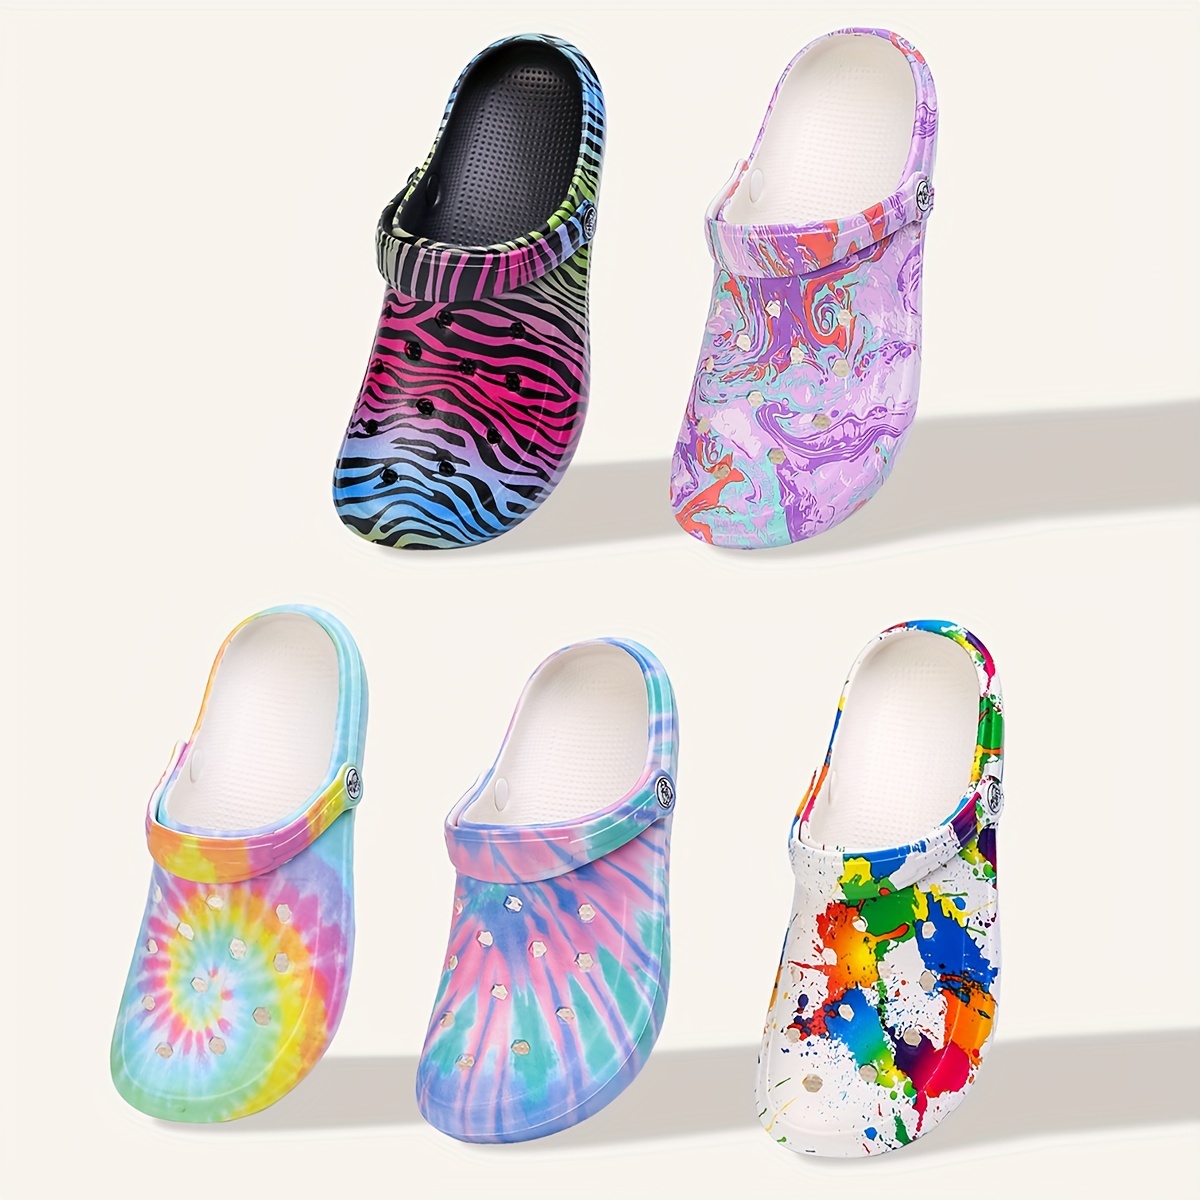 

Women's Tie Dye Print Garden Clogs, Trendy Soft Sole Pillow Shoes, Lightweight Slip On Clogs For Holiday